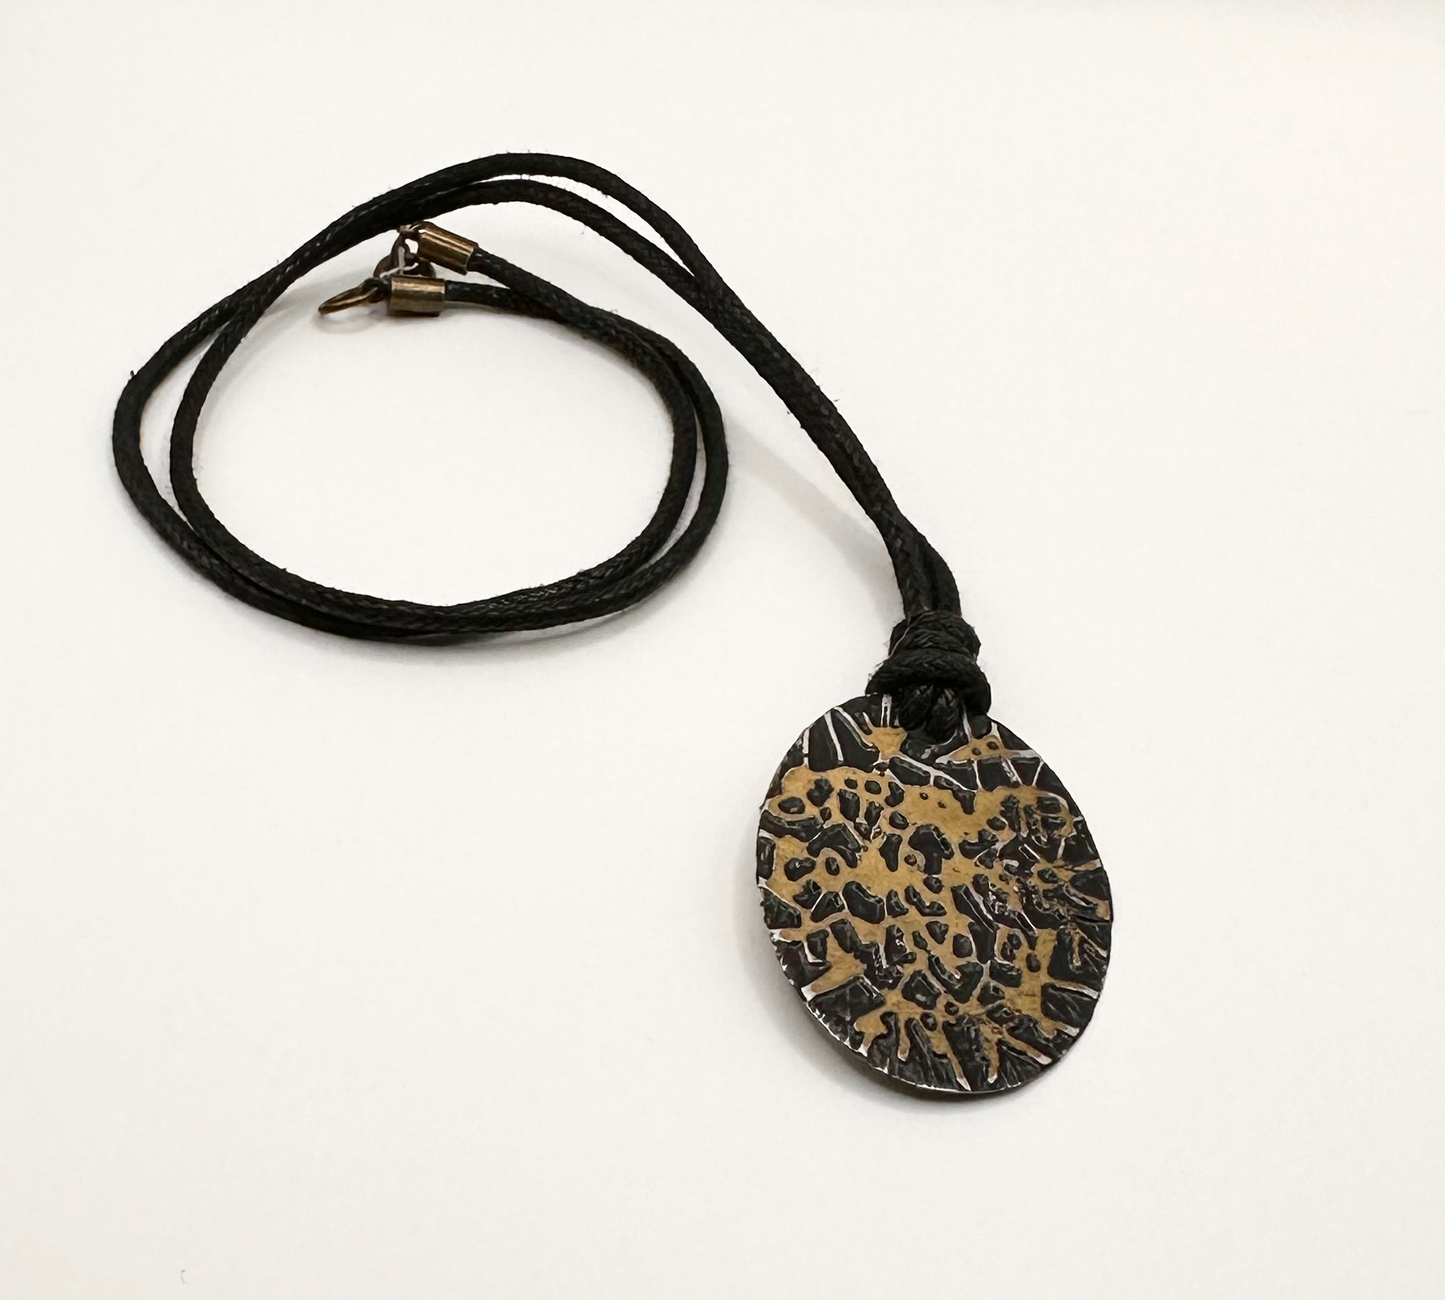 Geometric Patterned Brass Etched Pendant Necklace